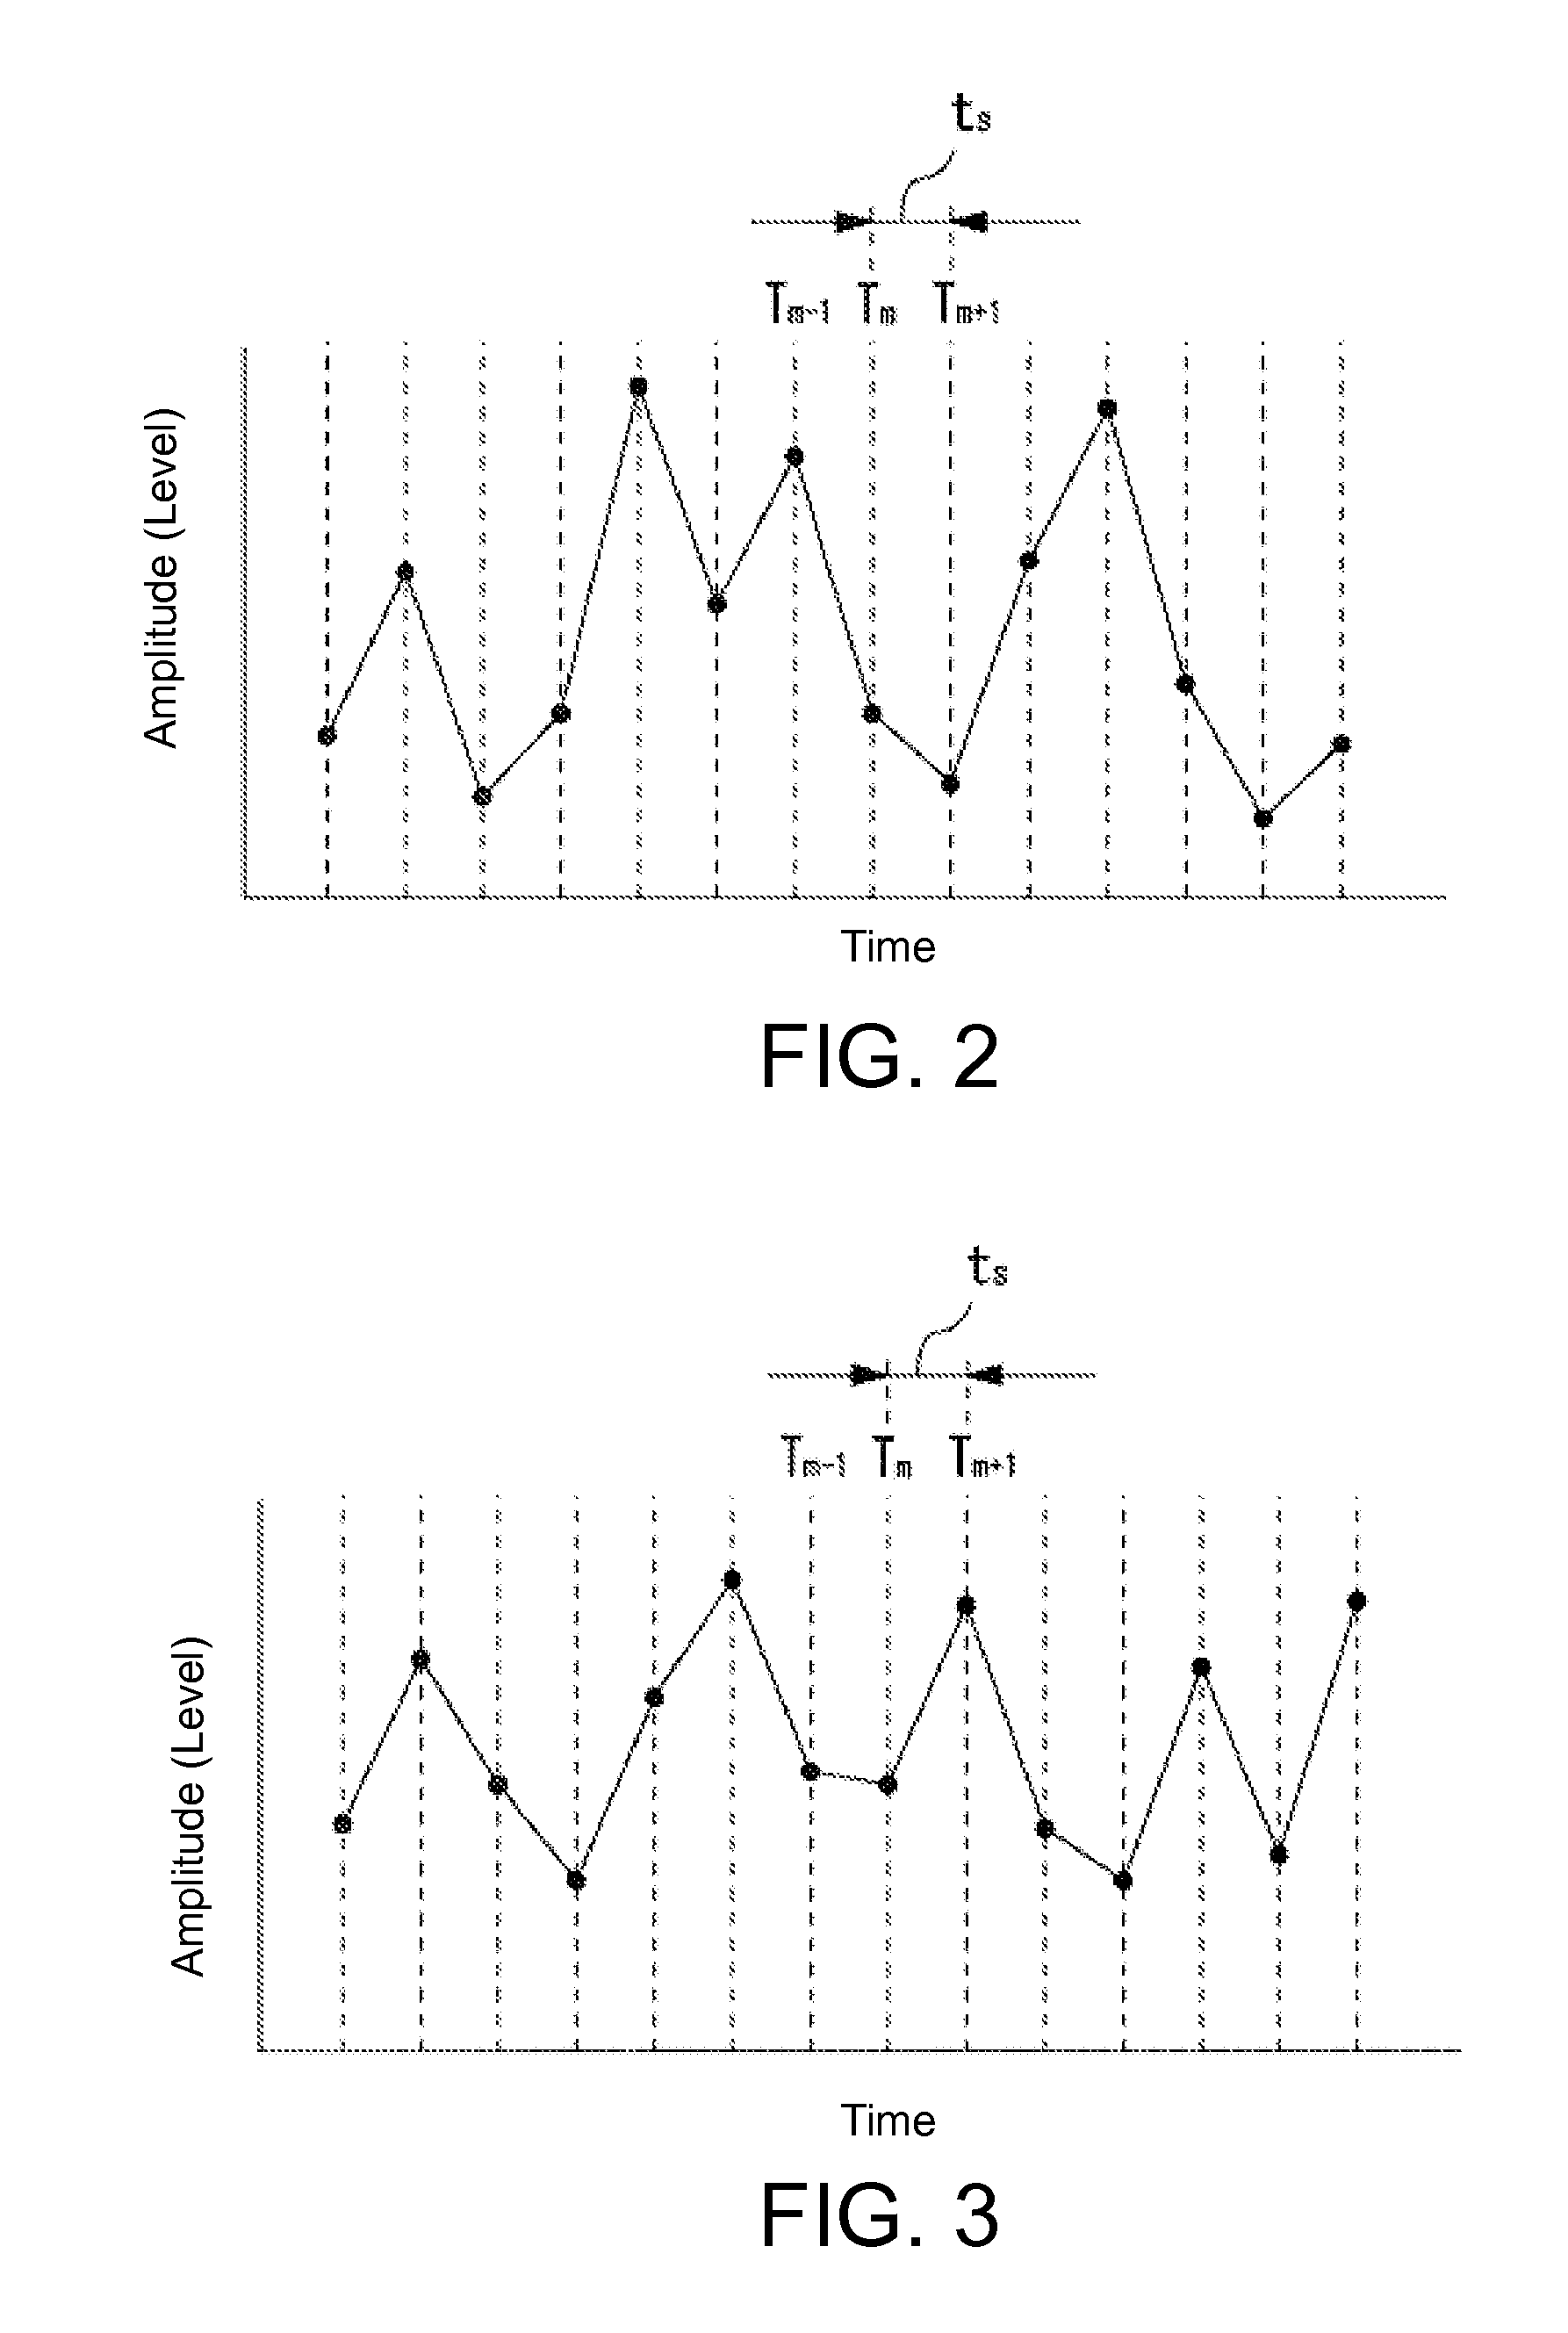 Measurement device for identifying electromagnetic interference source, method for estimating the same, and computer readable information recording medium enabling operations thereof